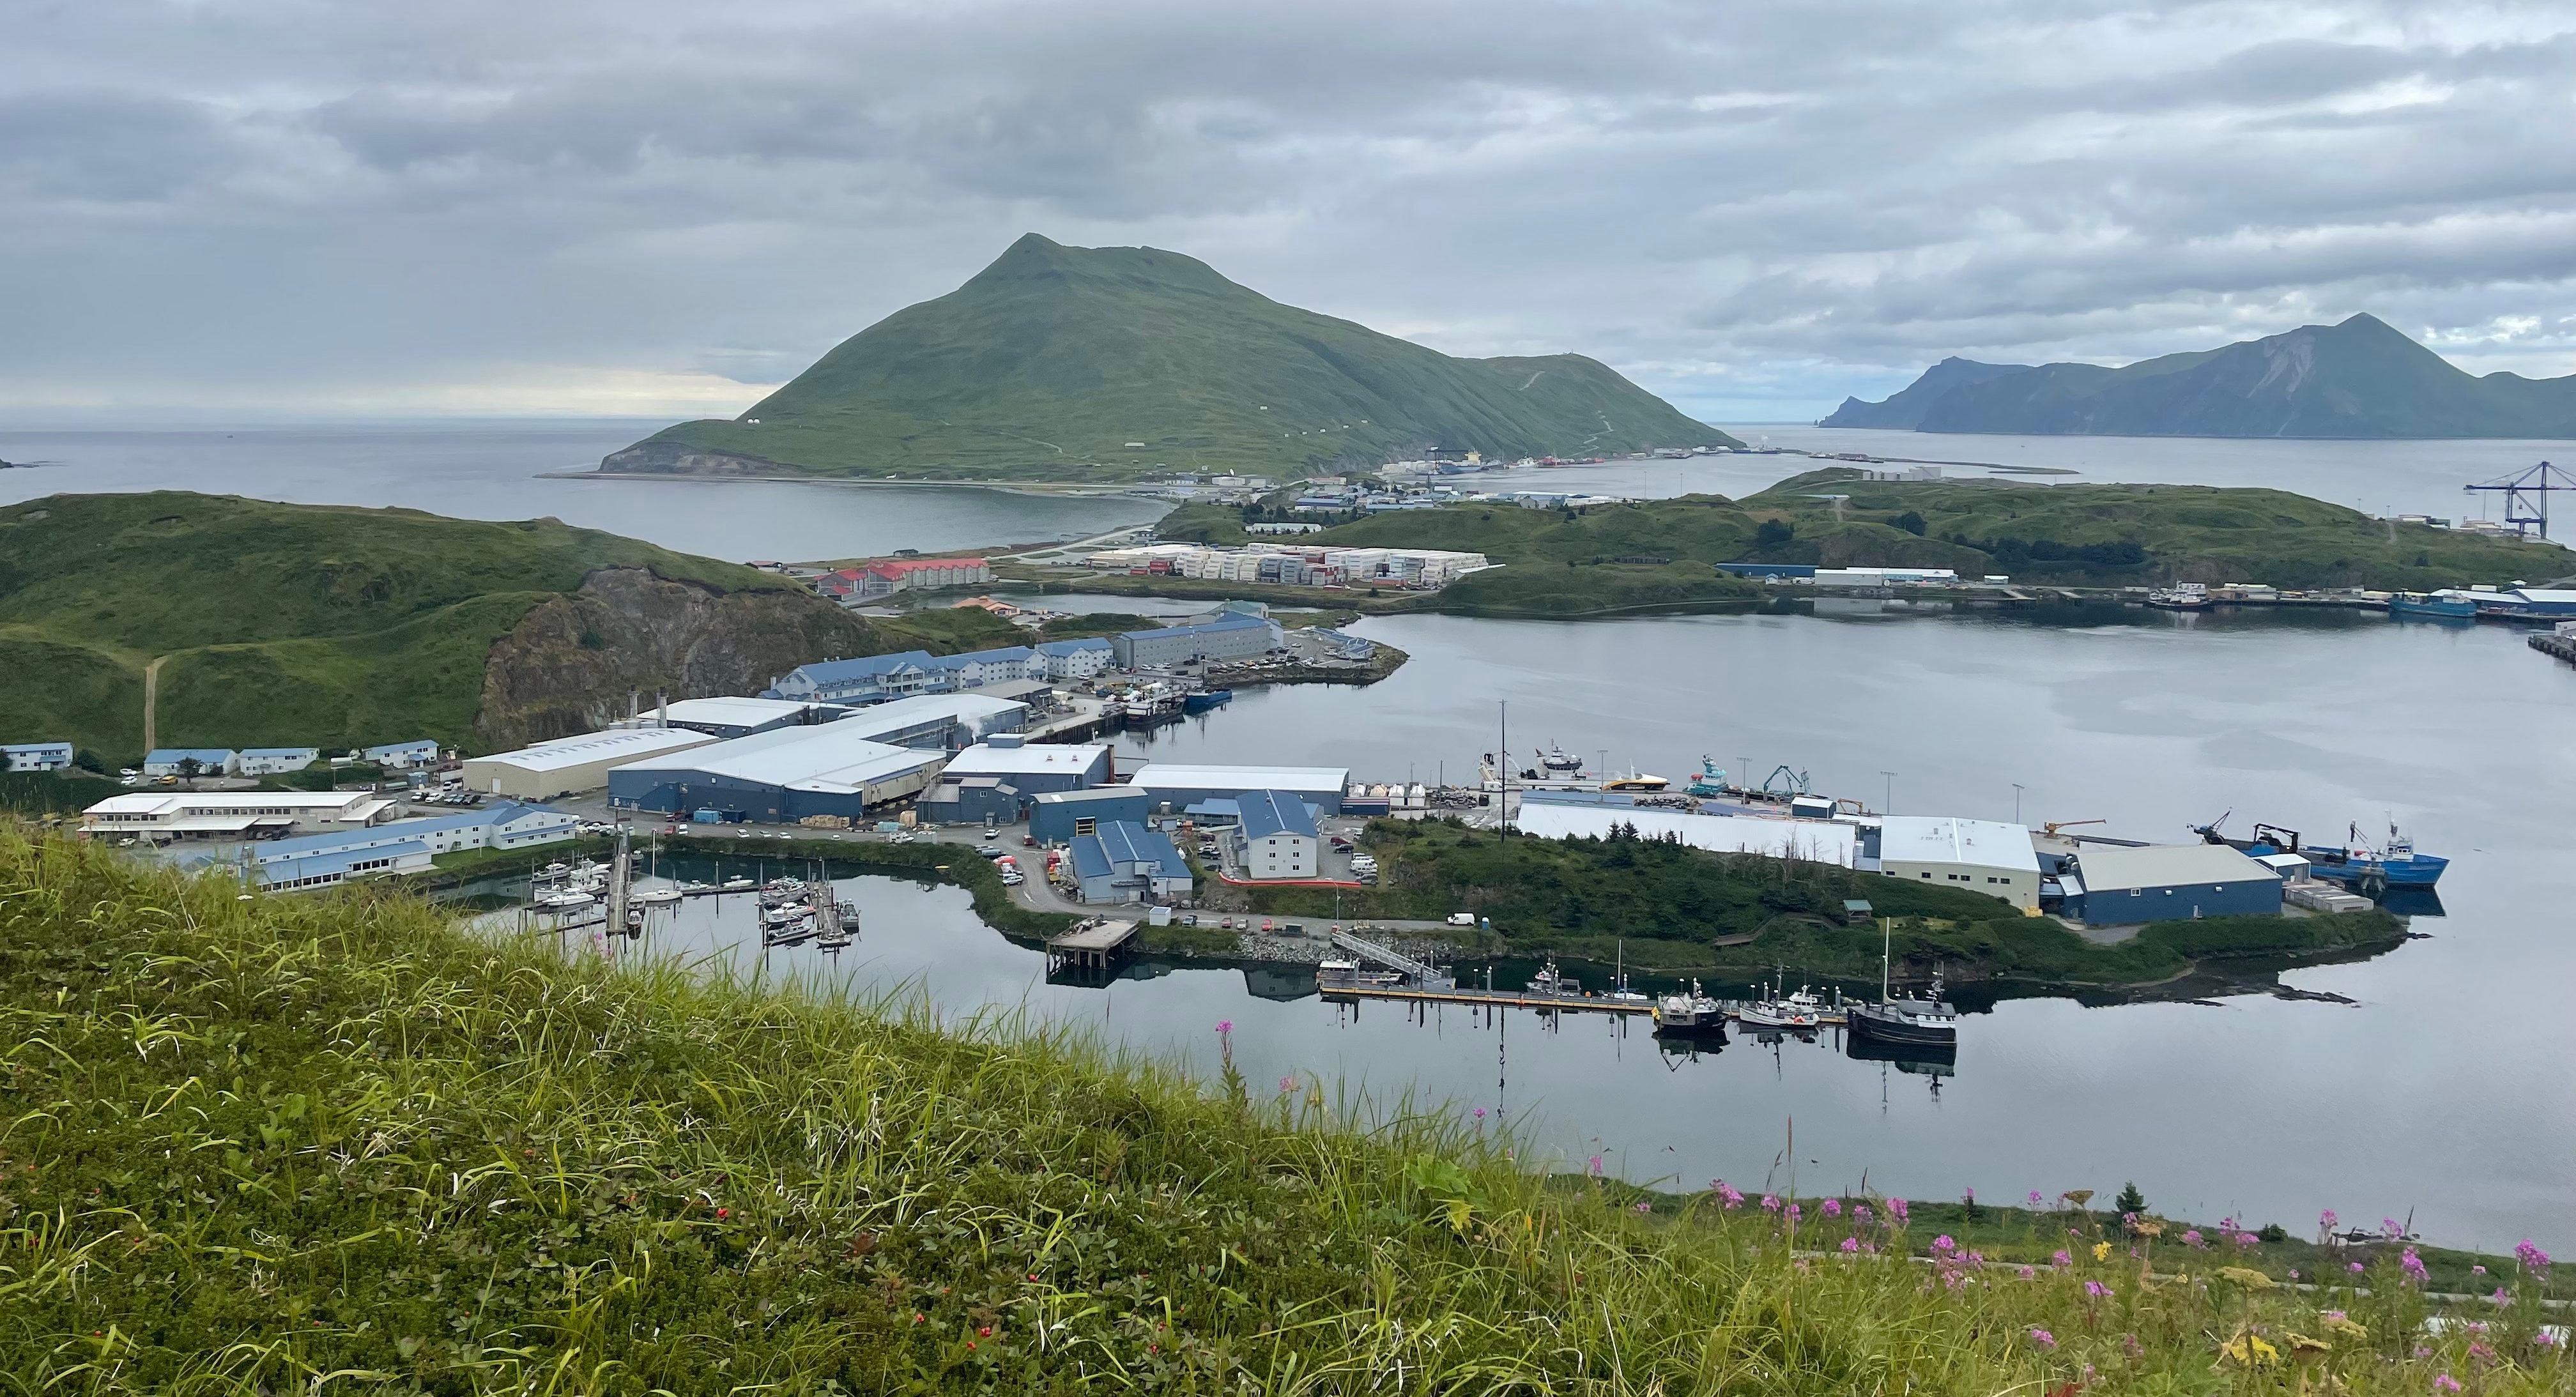 Seafood processors and green mountains in Dutch Harbor, Alaska